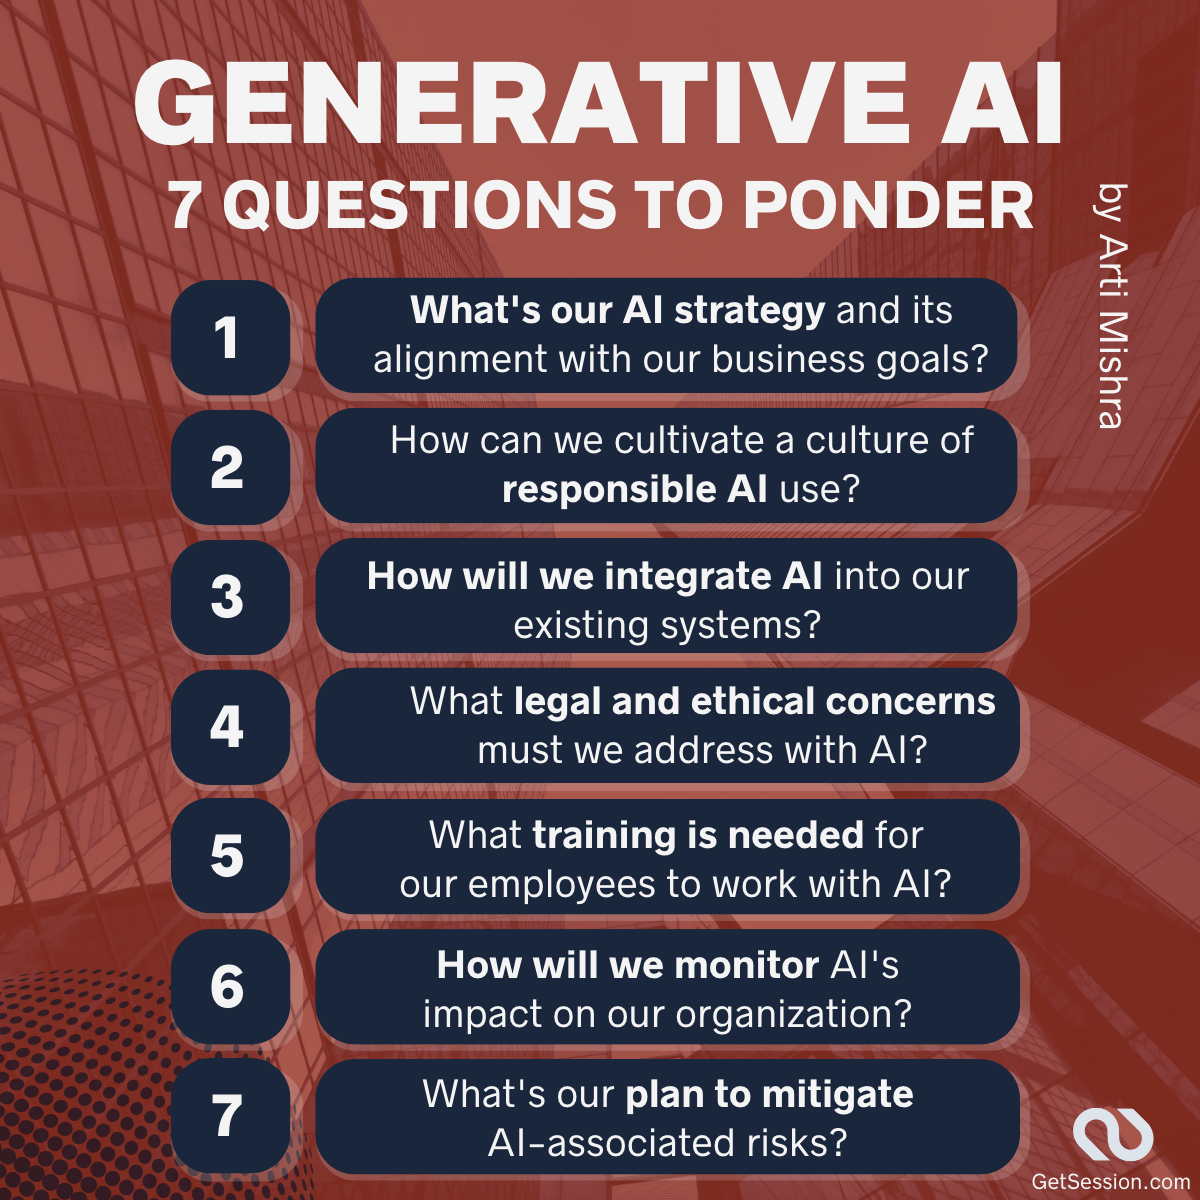 7 questions to ponder about the use of Generative AI in organizations by HR Business Partner Arti Mishra